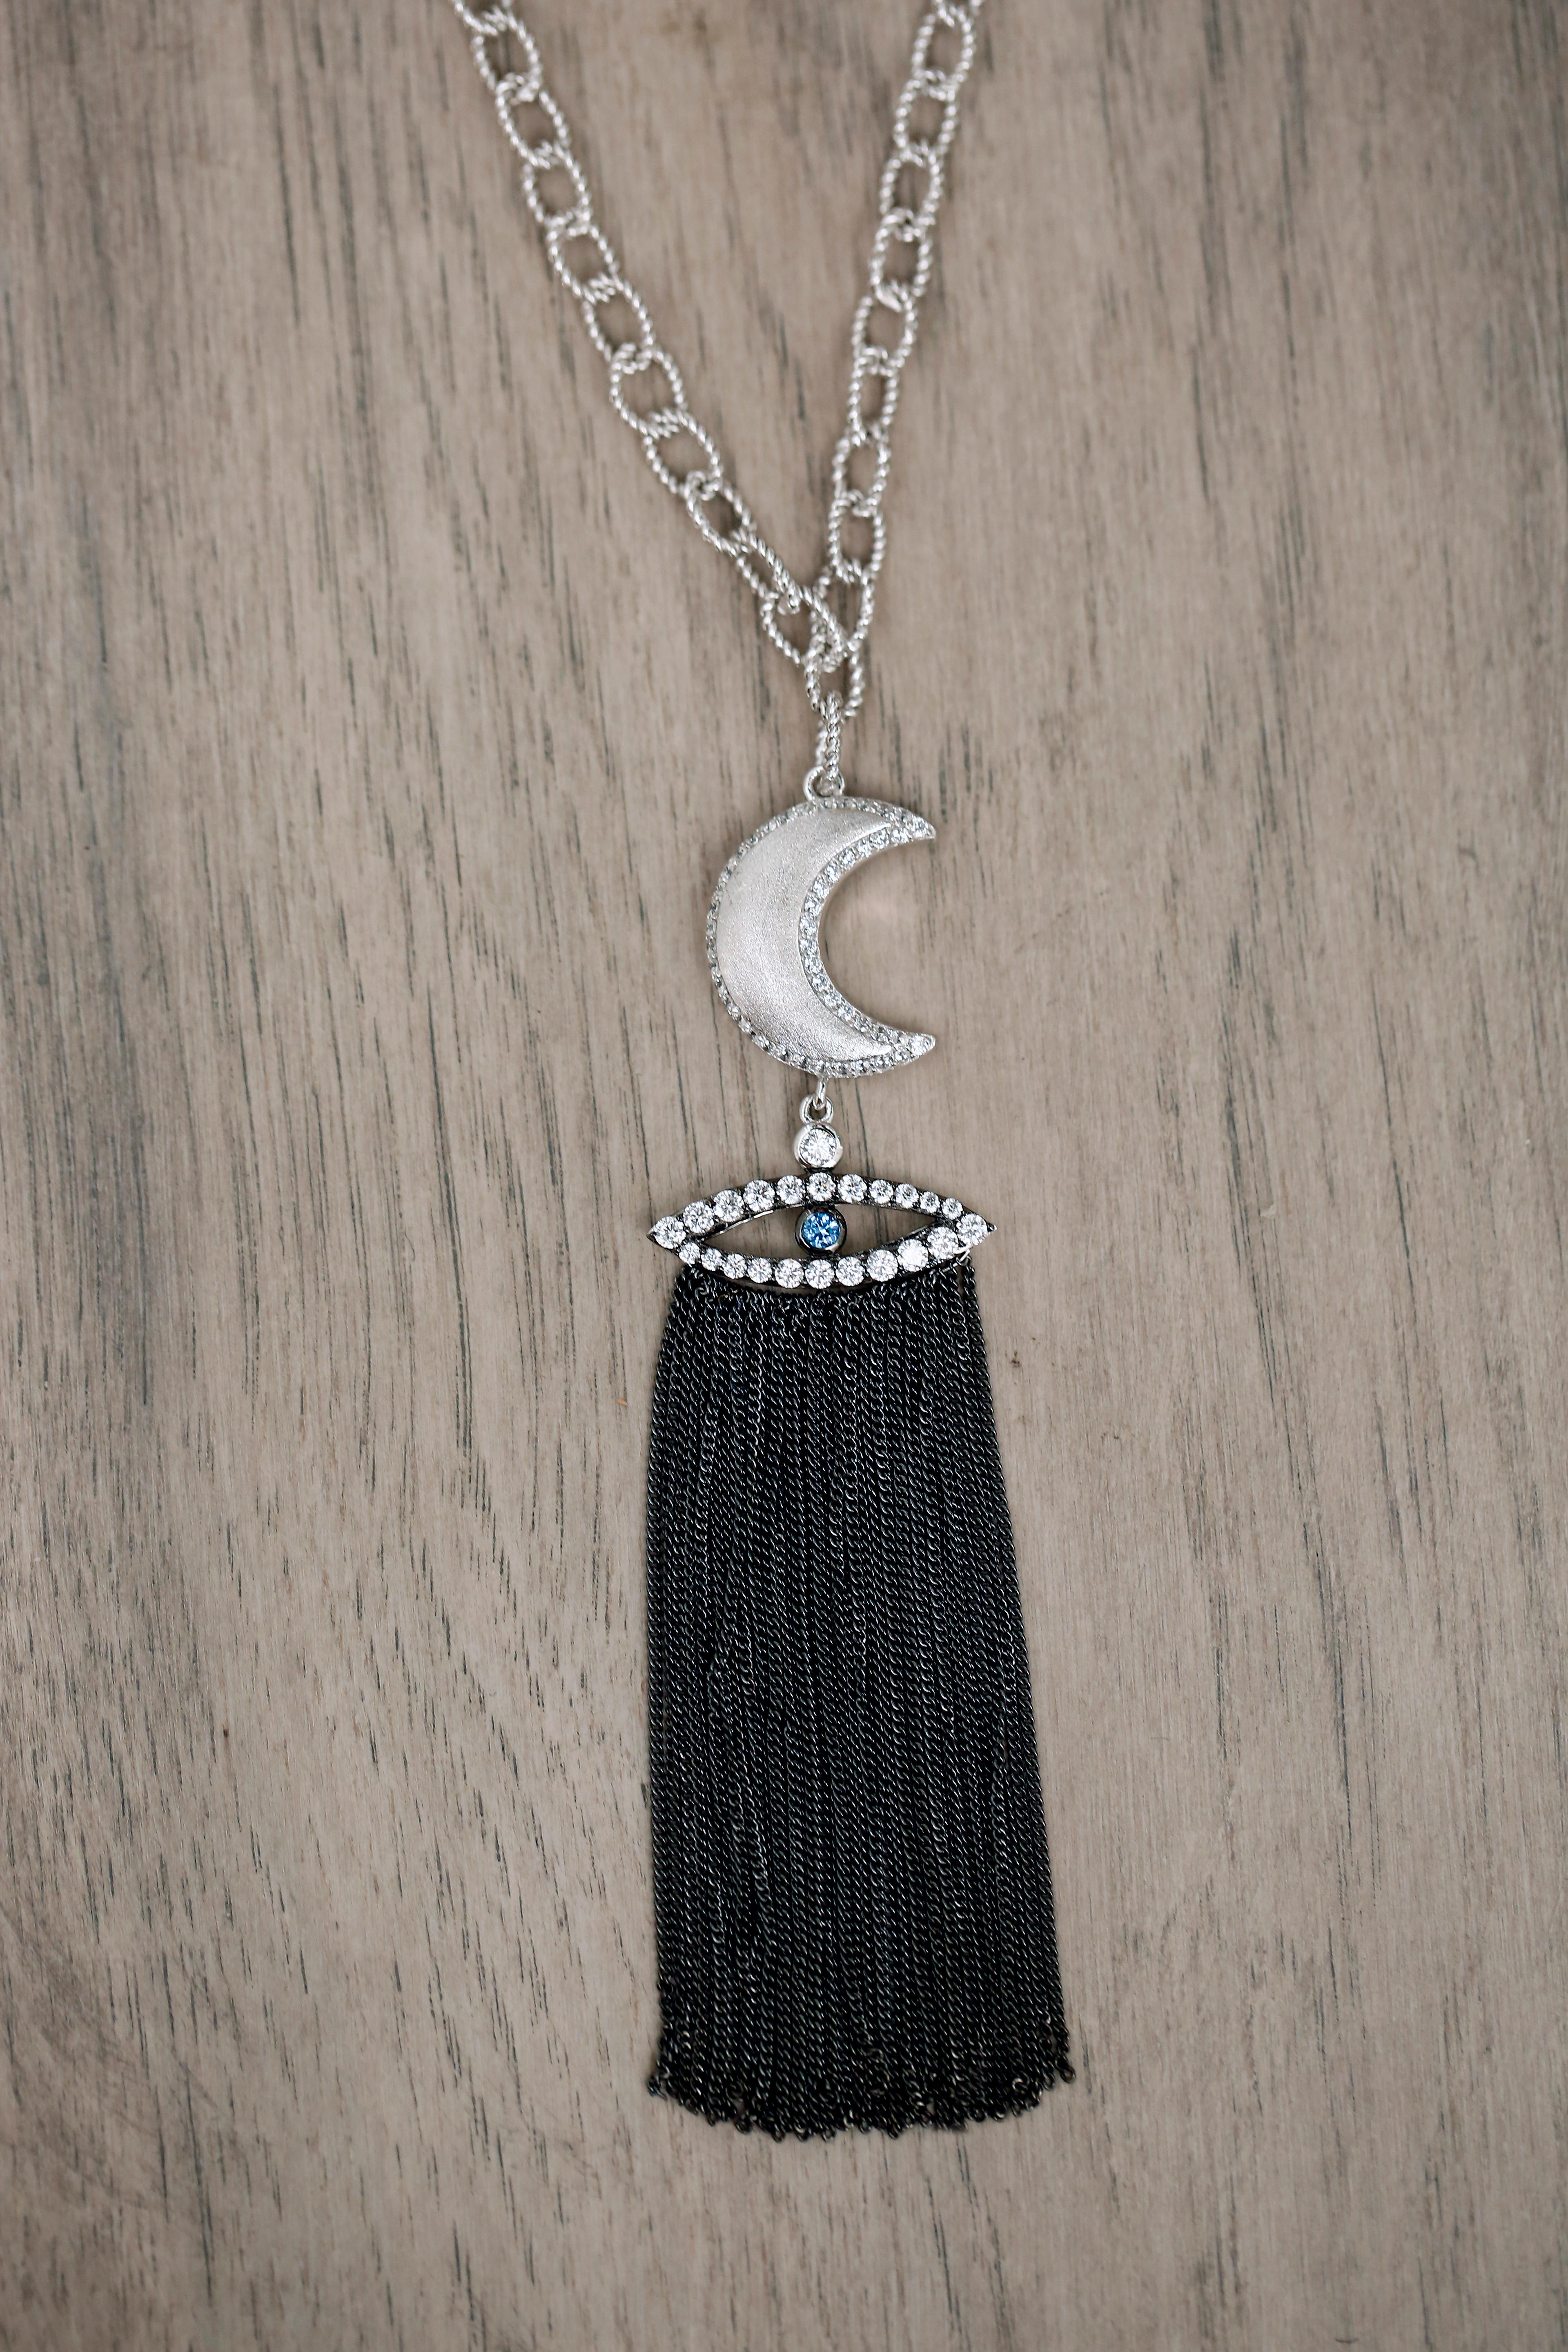 Contemporary Evil Eye Necklace Protective and Lucky with Tassels